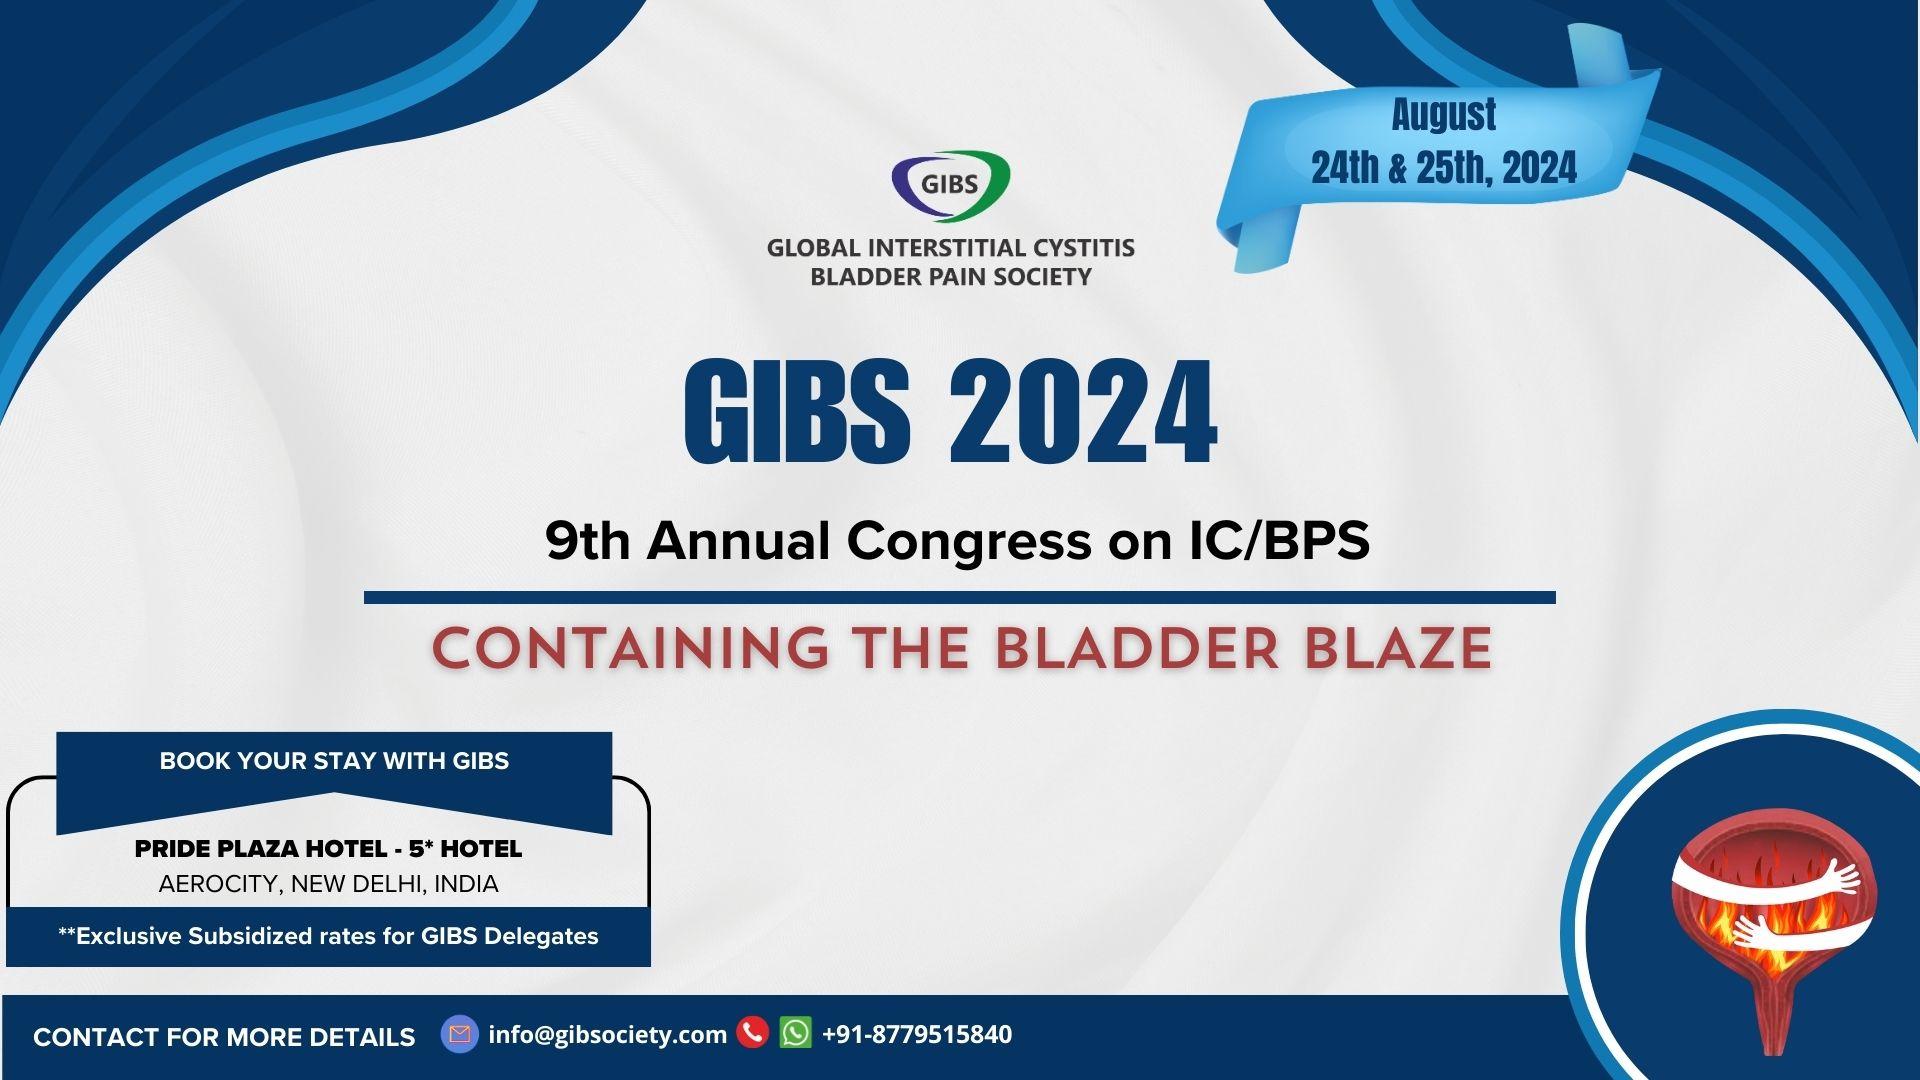 GIBS 2024 - 9th Annual Congress on IC/BPS